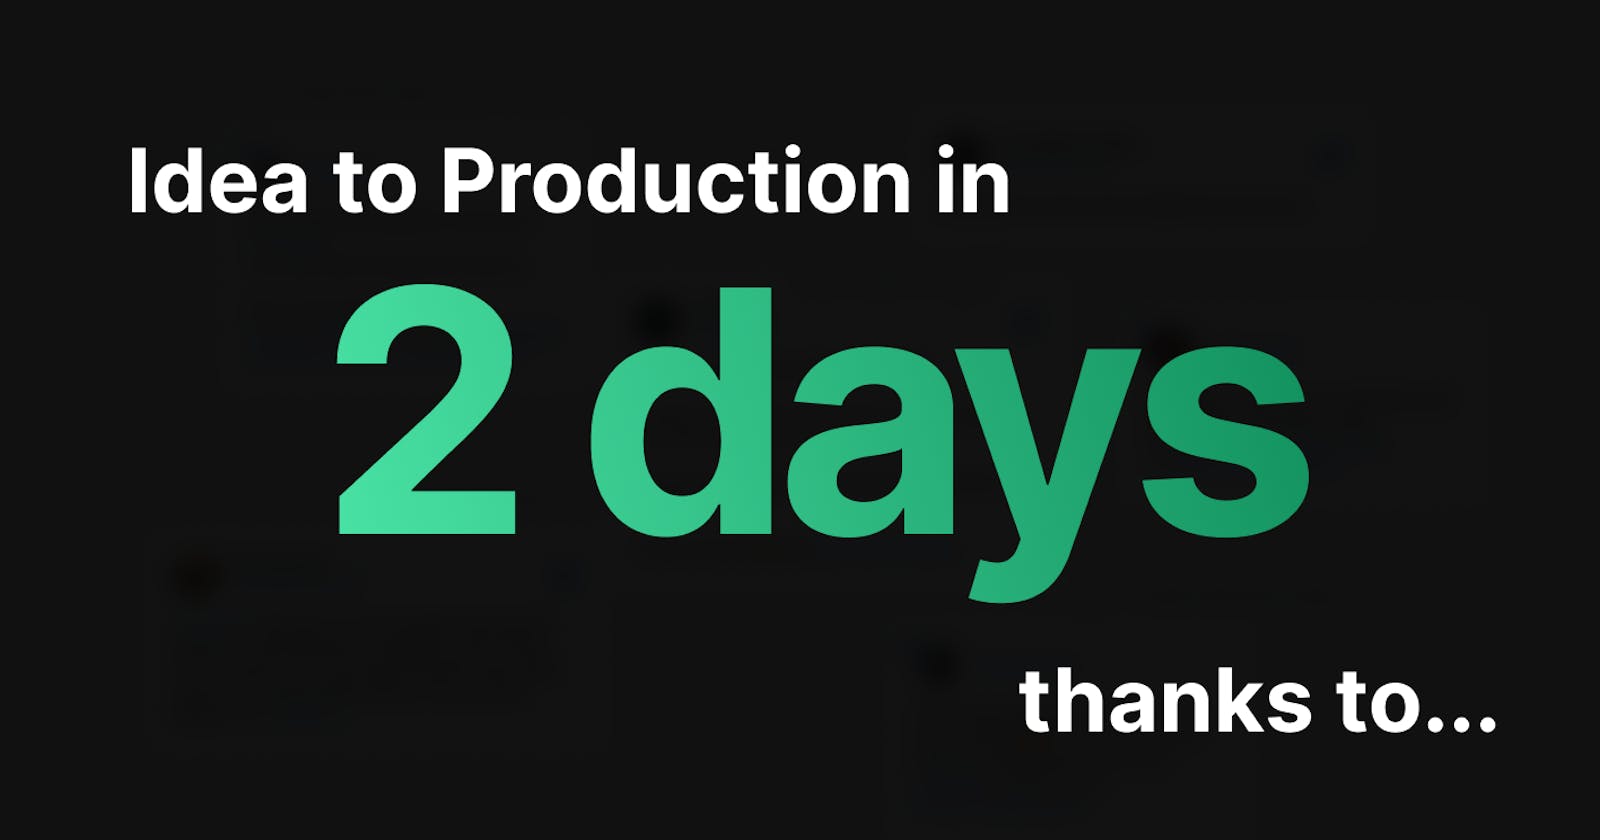 Idea to Production in 2 days, thanks to...